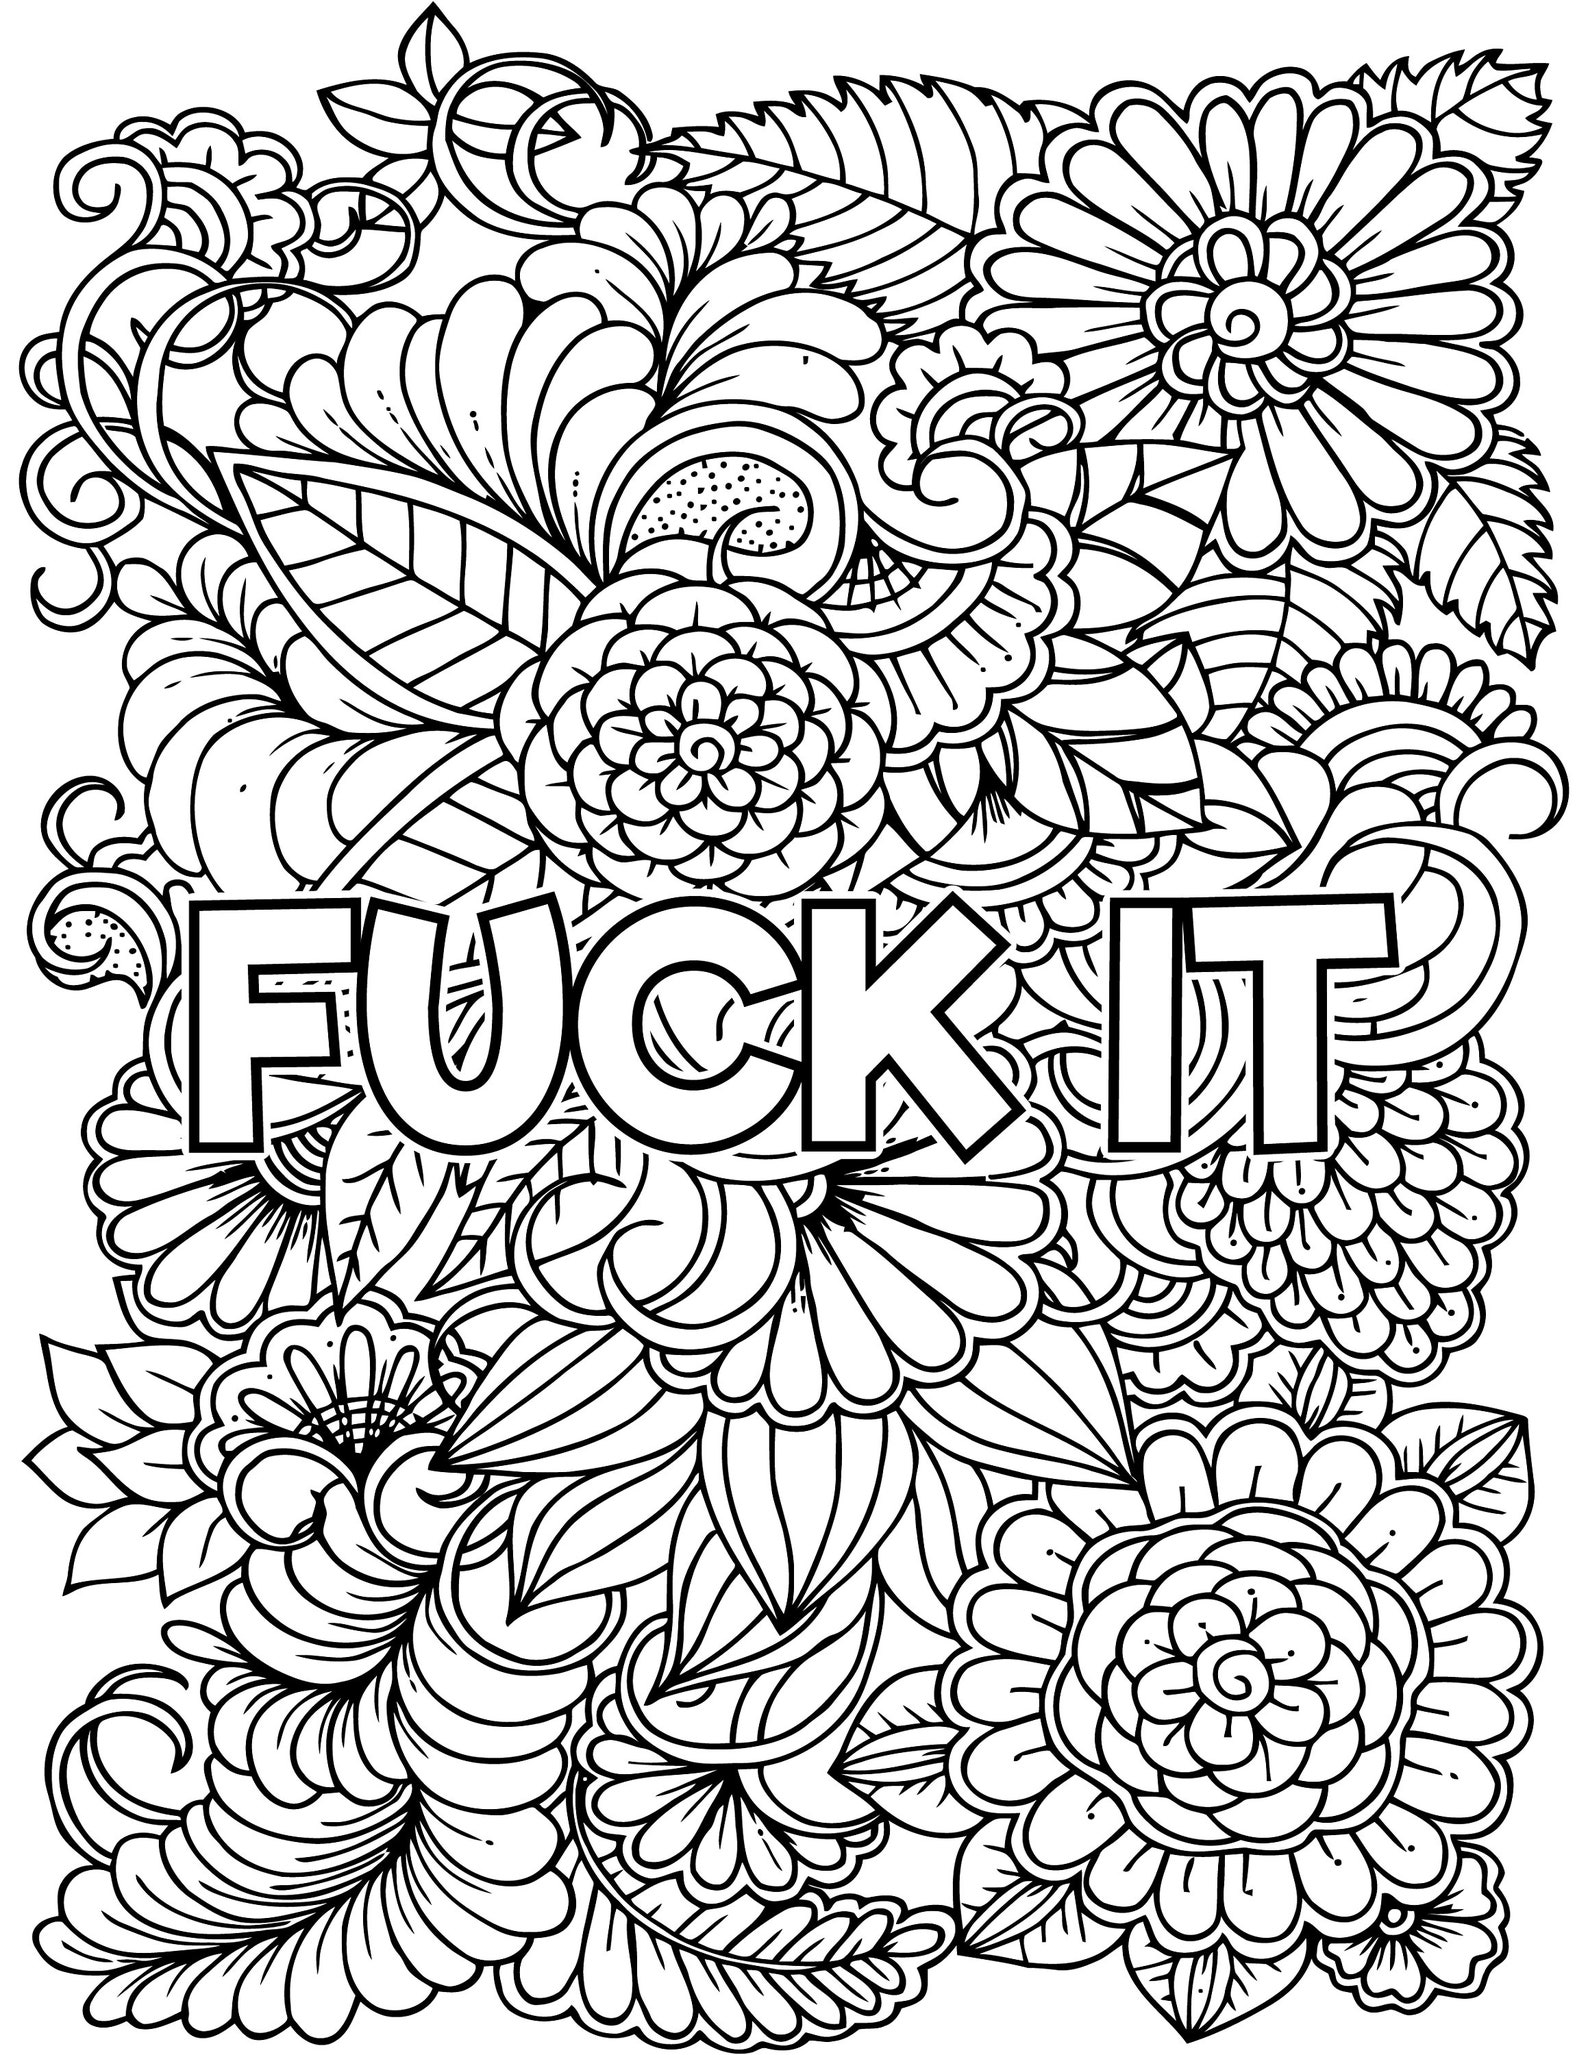 Adult Coloring Pages Swear Words Classic Fuck Edition | Etsy